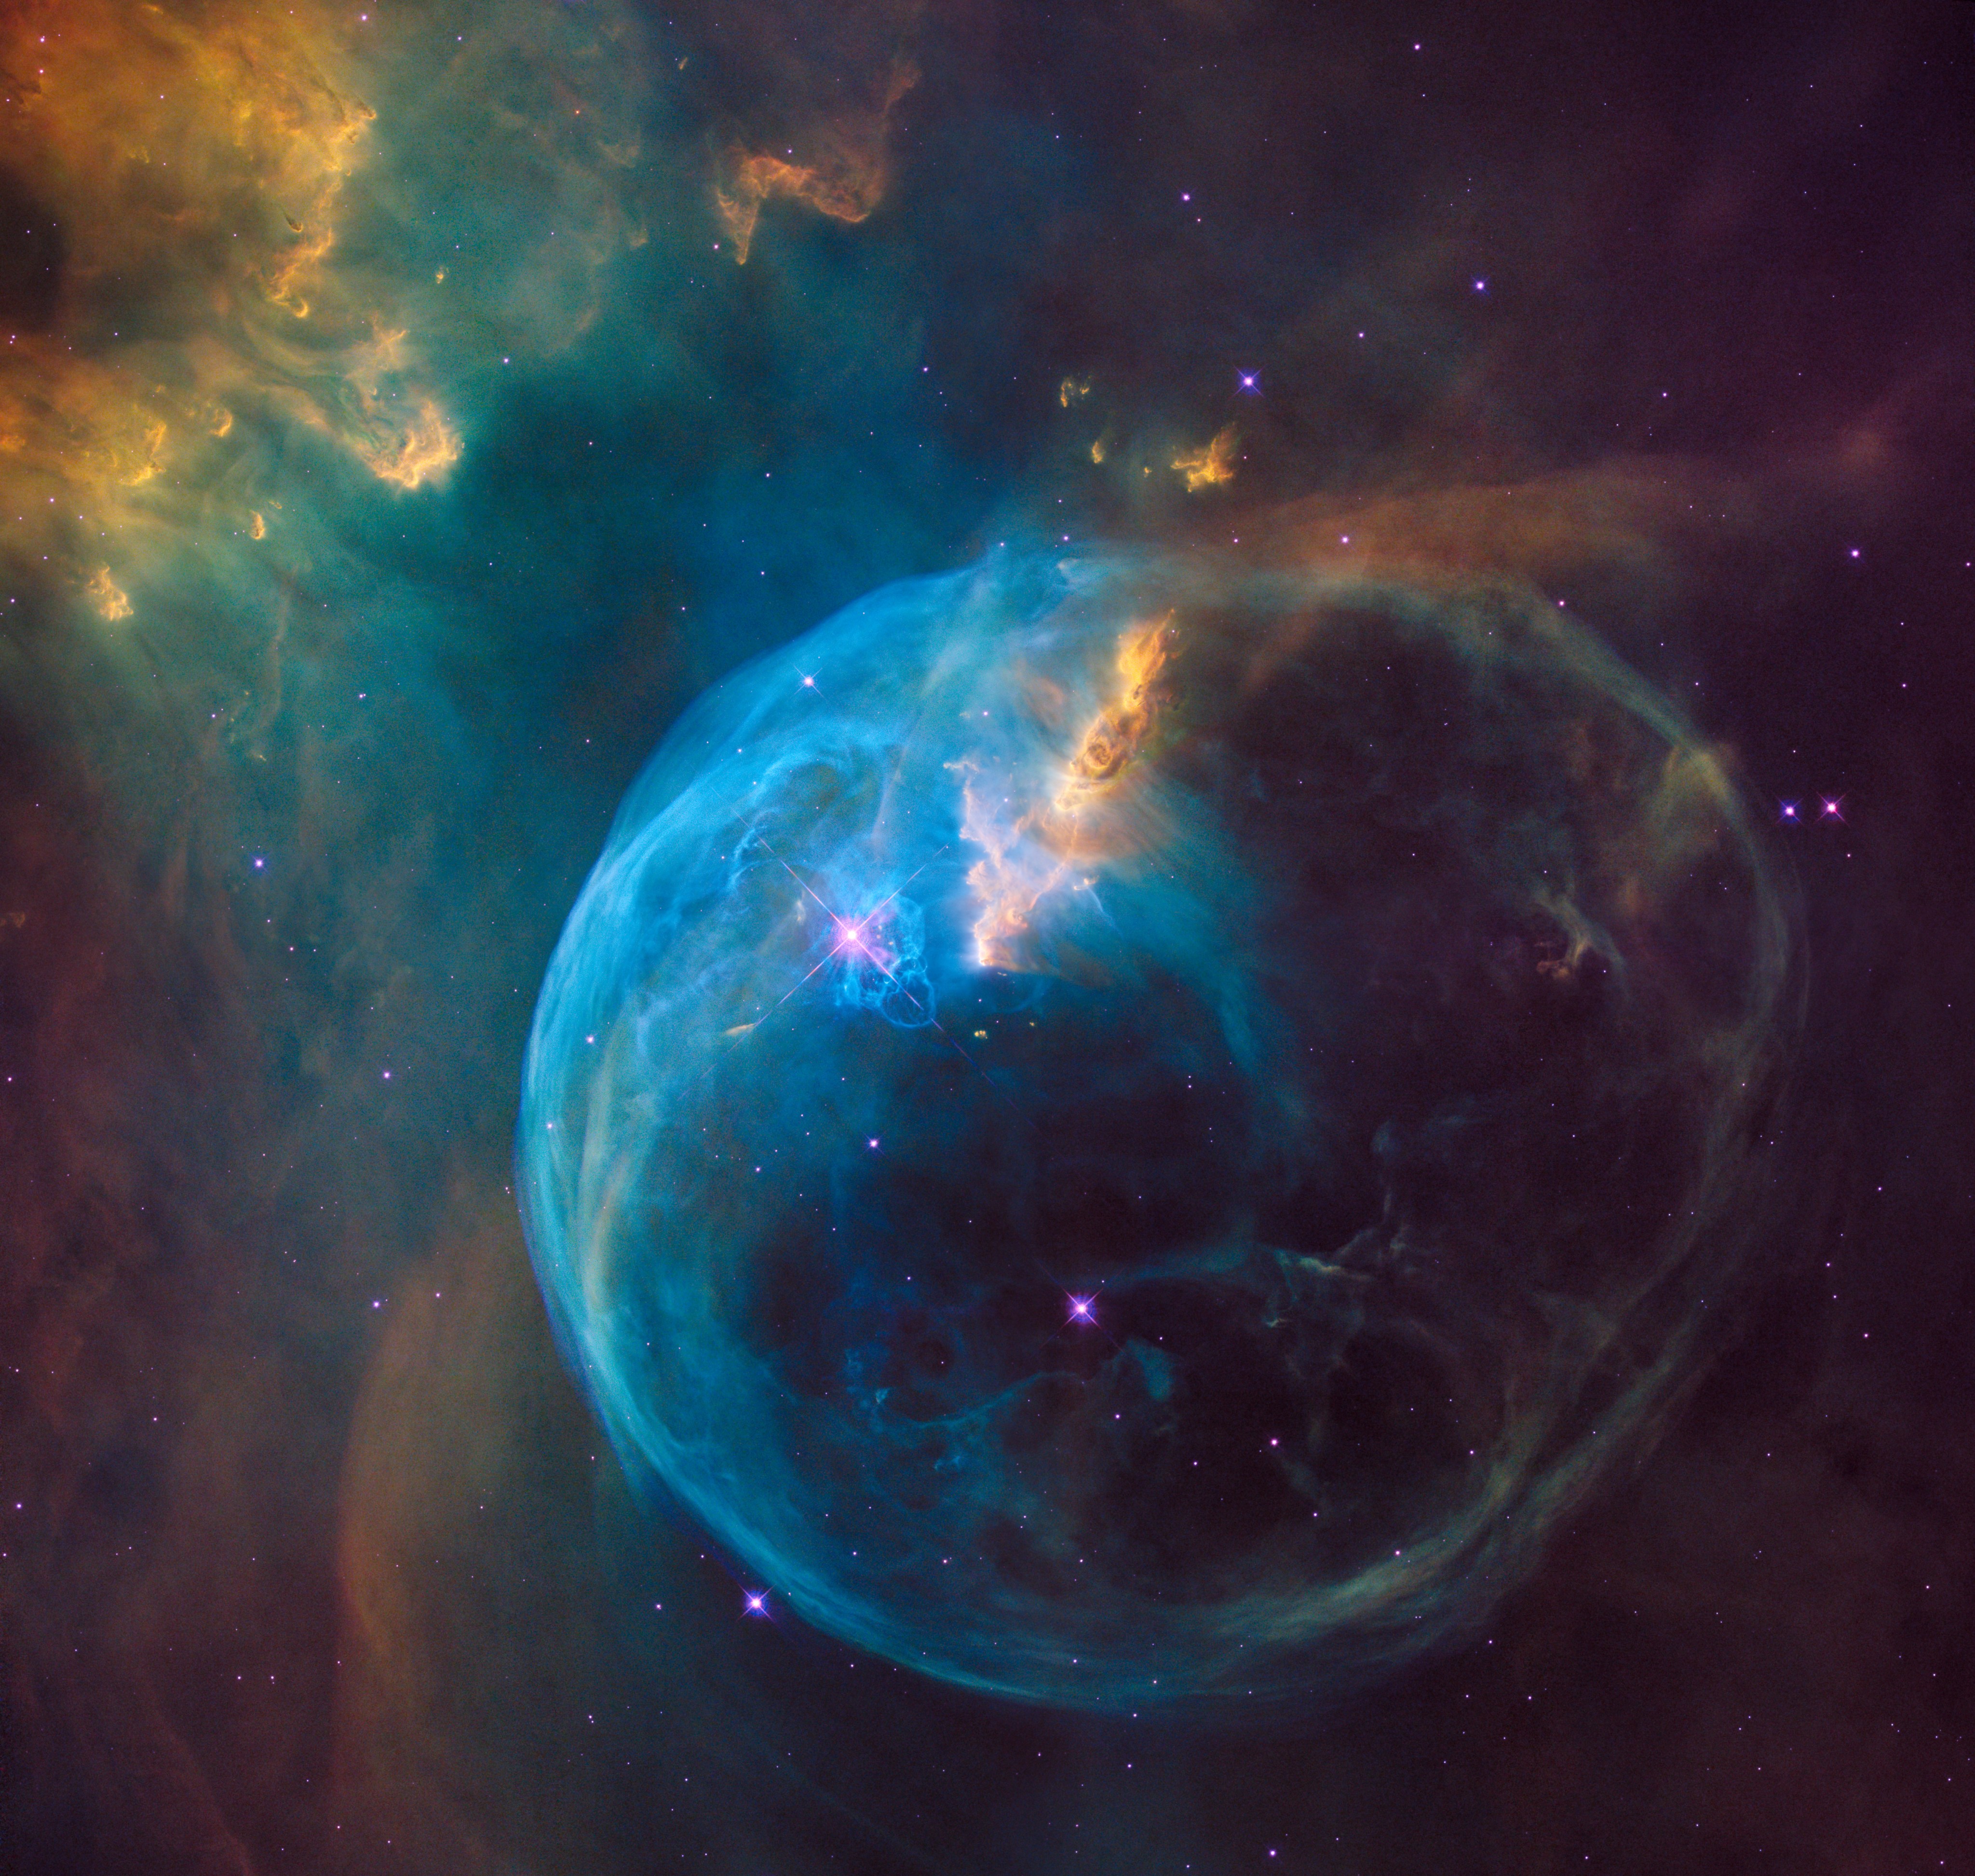 Large blue bubble in the center of the image with tufts of yellow/orange clouds of dust and gas in the top left of the image, and a bit at the top of the blue bubble. Random purple stars are seen speckled at random throughout the image.